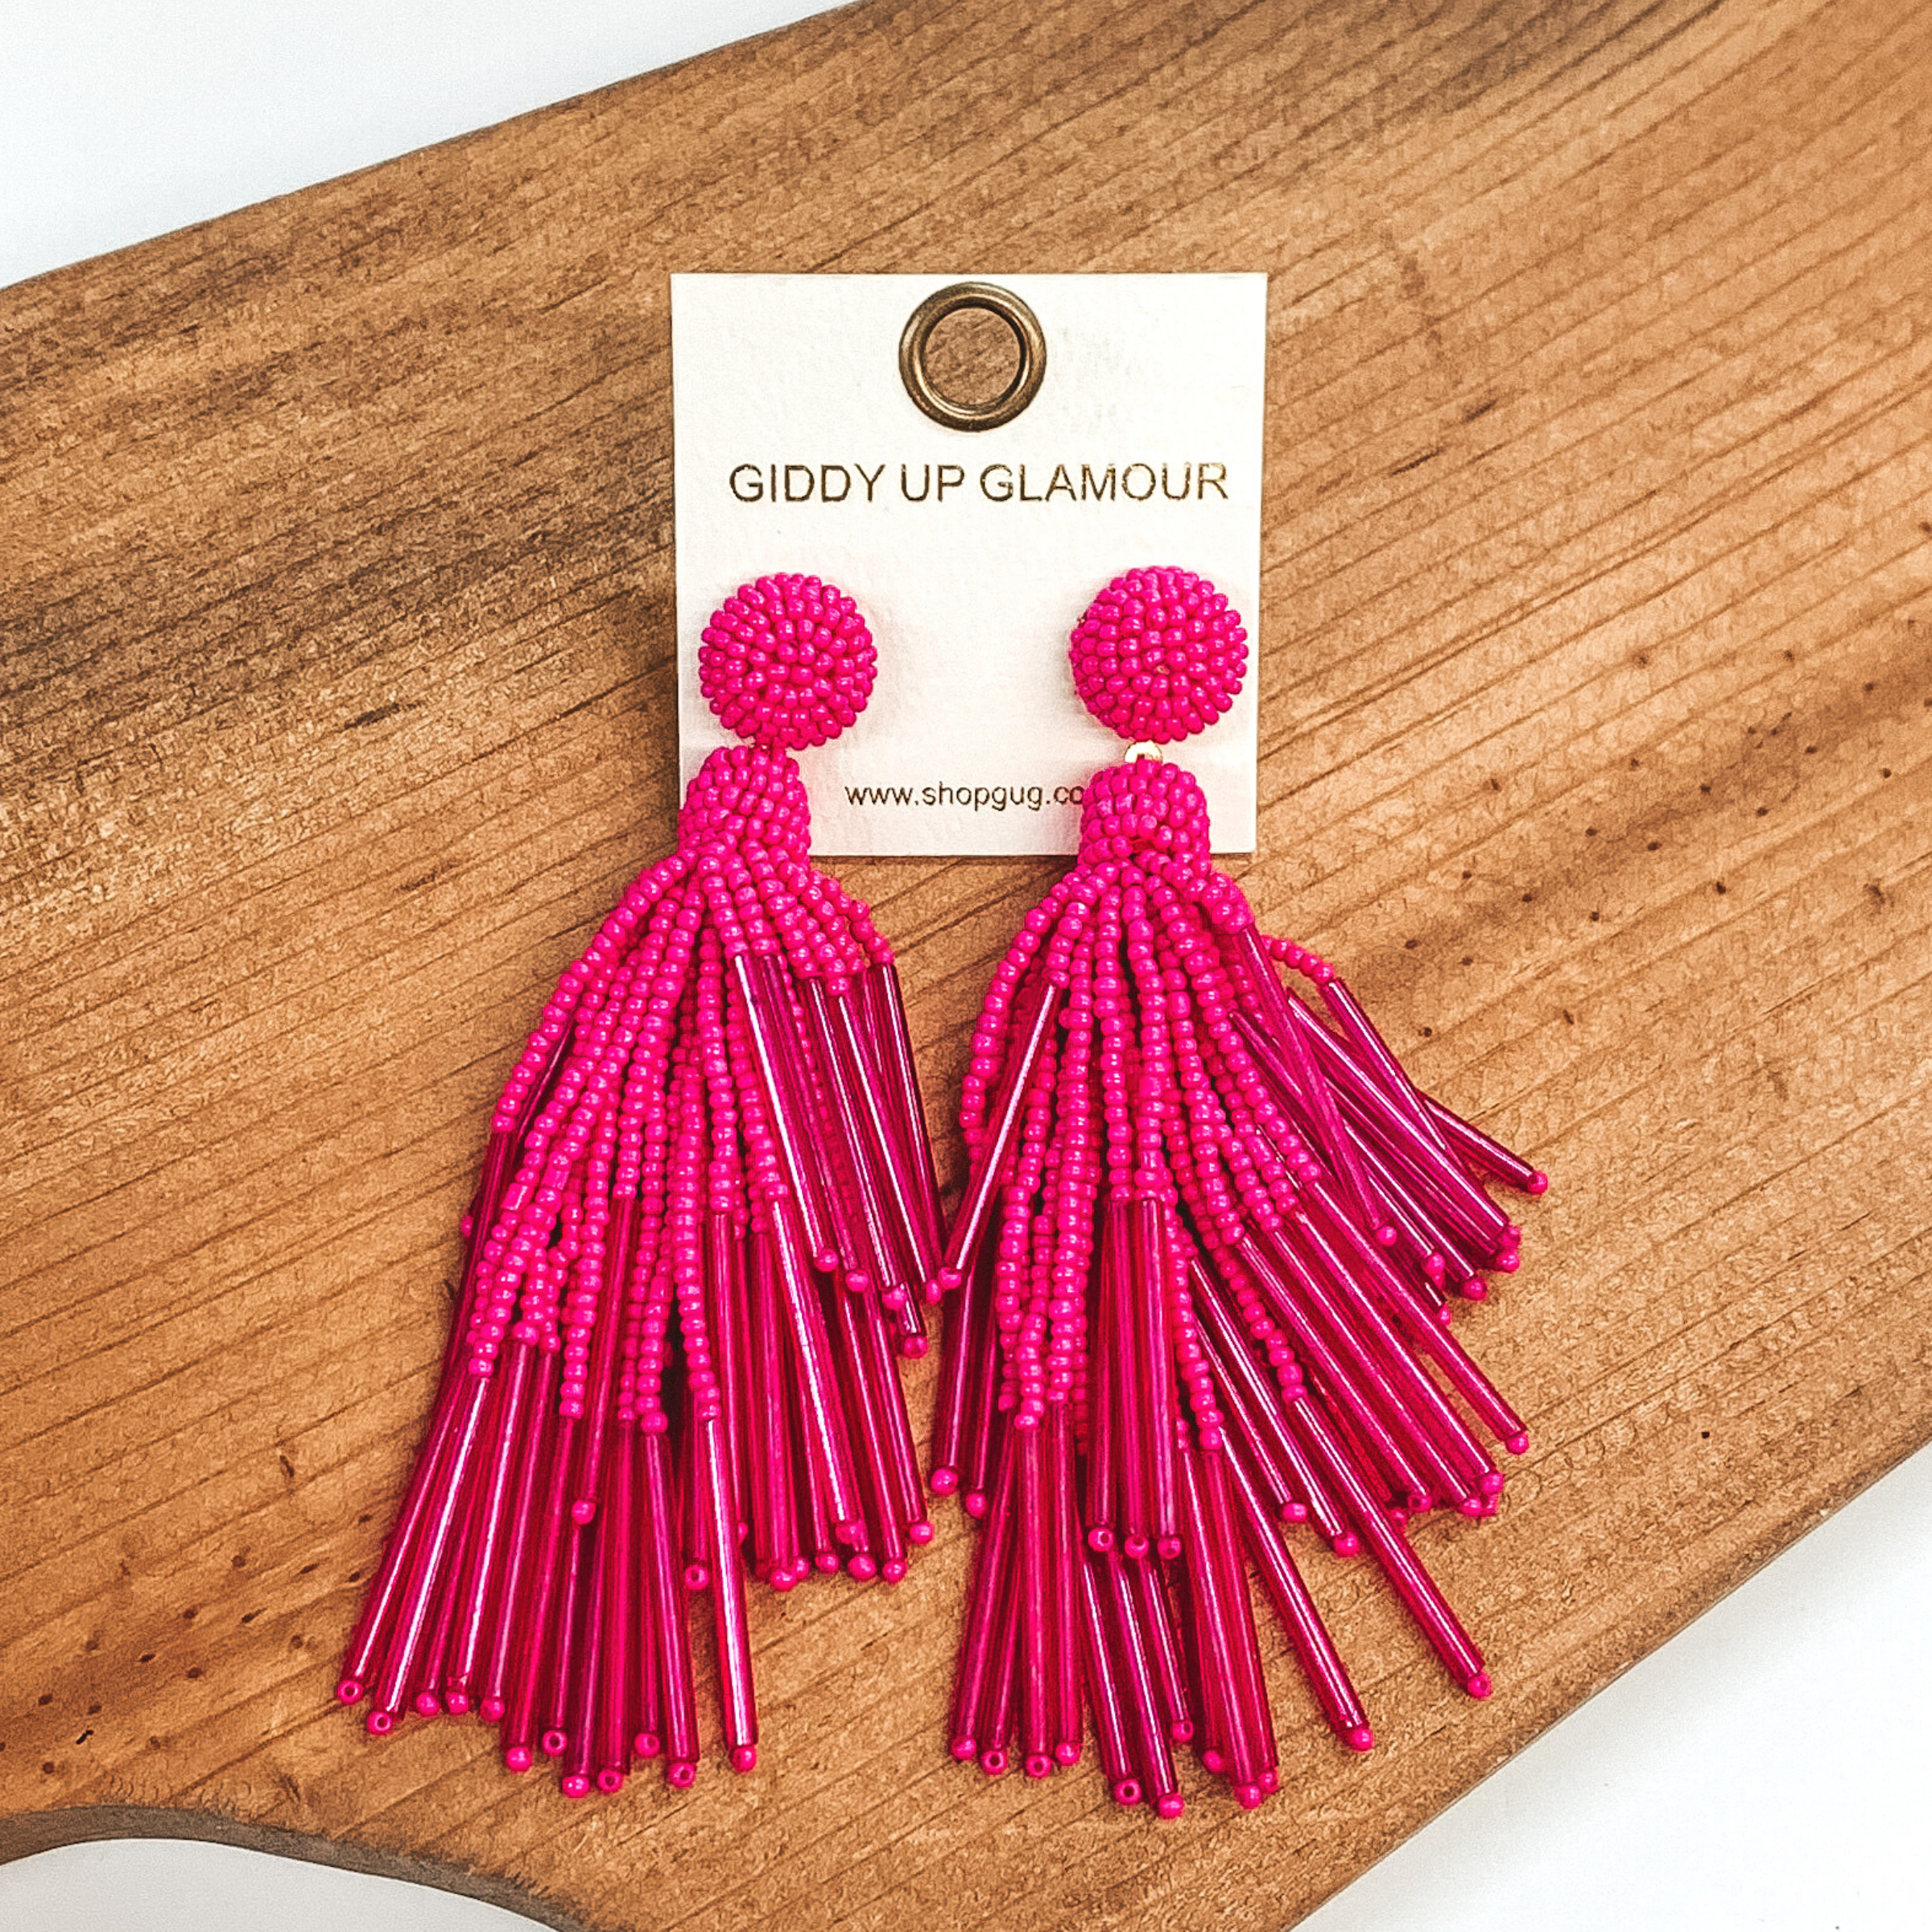 Circle beaded stud earrings with a beaded tassel in hot pink. These earrings are pictured laying on a brown piece of wood on a white background.